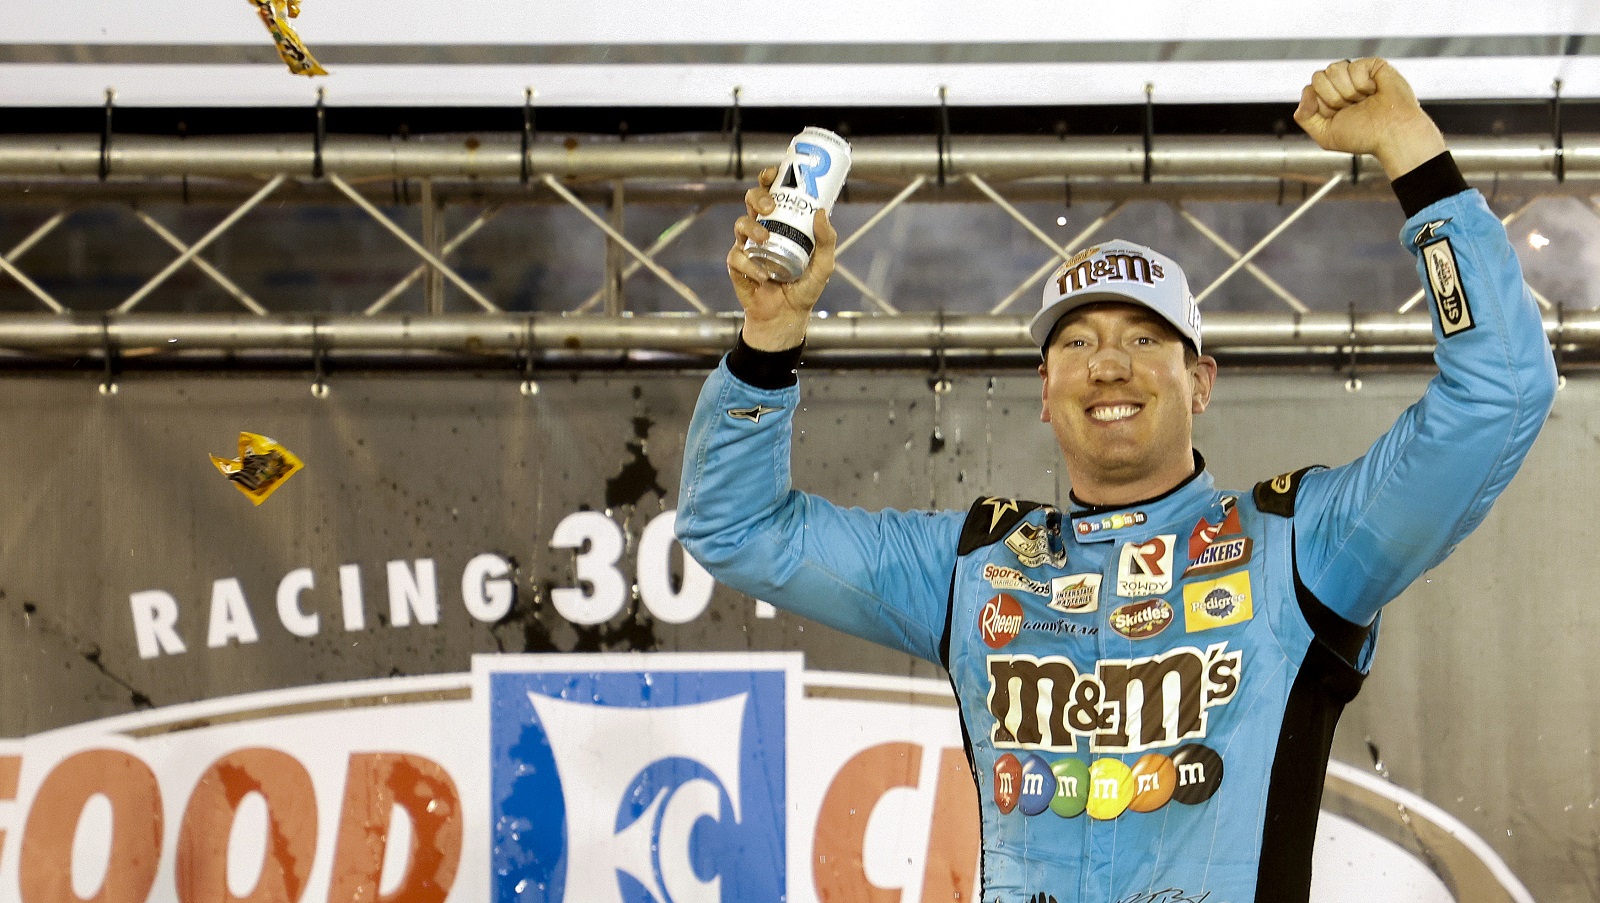 Kyle Busch celebrates in Victory Lane after winning the NASCAR Cup Series Food City Dirt Race at Bristol Motor Speedway on April 17, 2022. | Chris Graythen/Getty Images